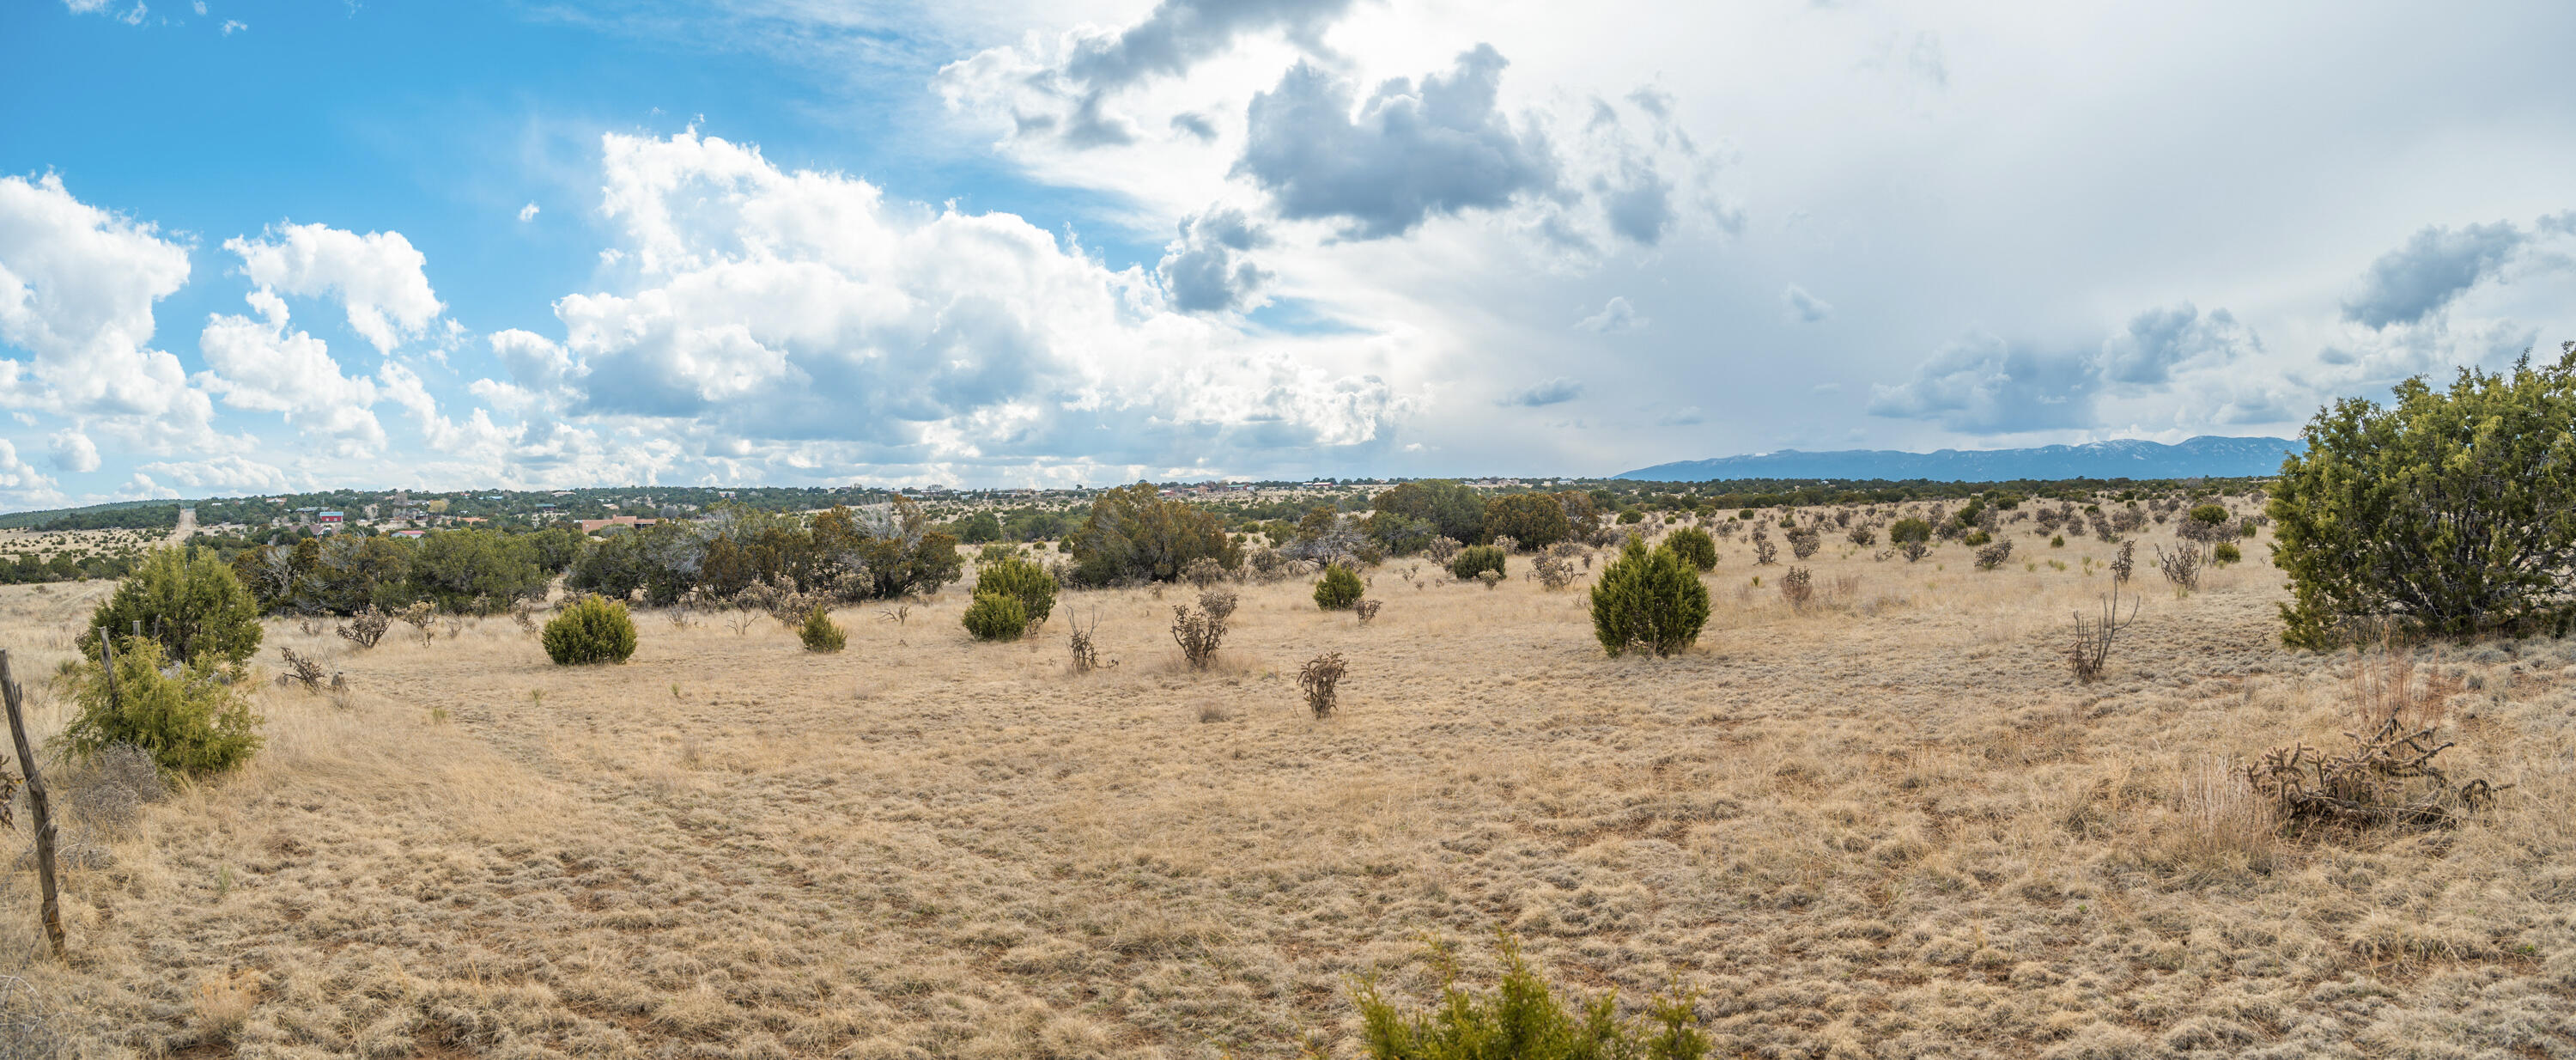 11 Sabra Ranch Place, Edgewood, New Mexico 87015, ,Land,For Sale,11 Sabra Ranch Place,1059488